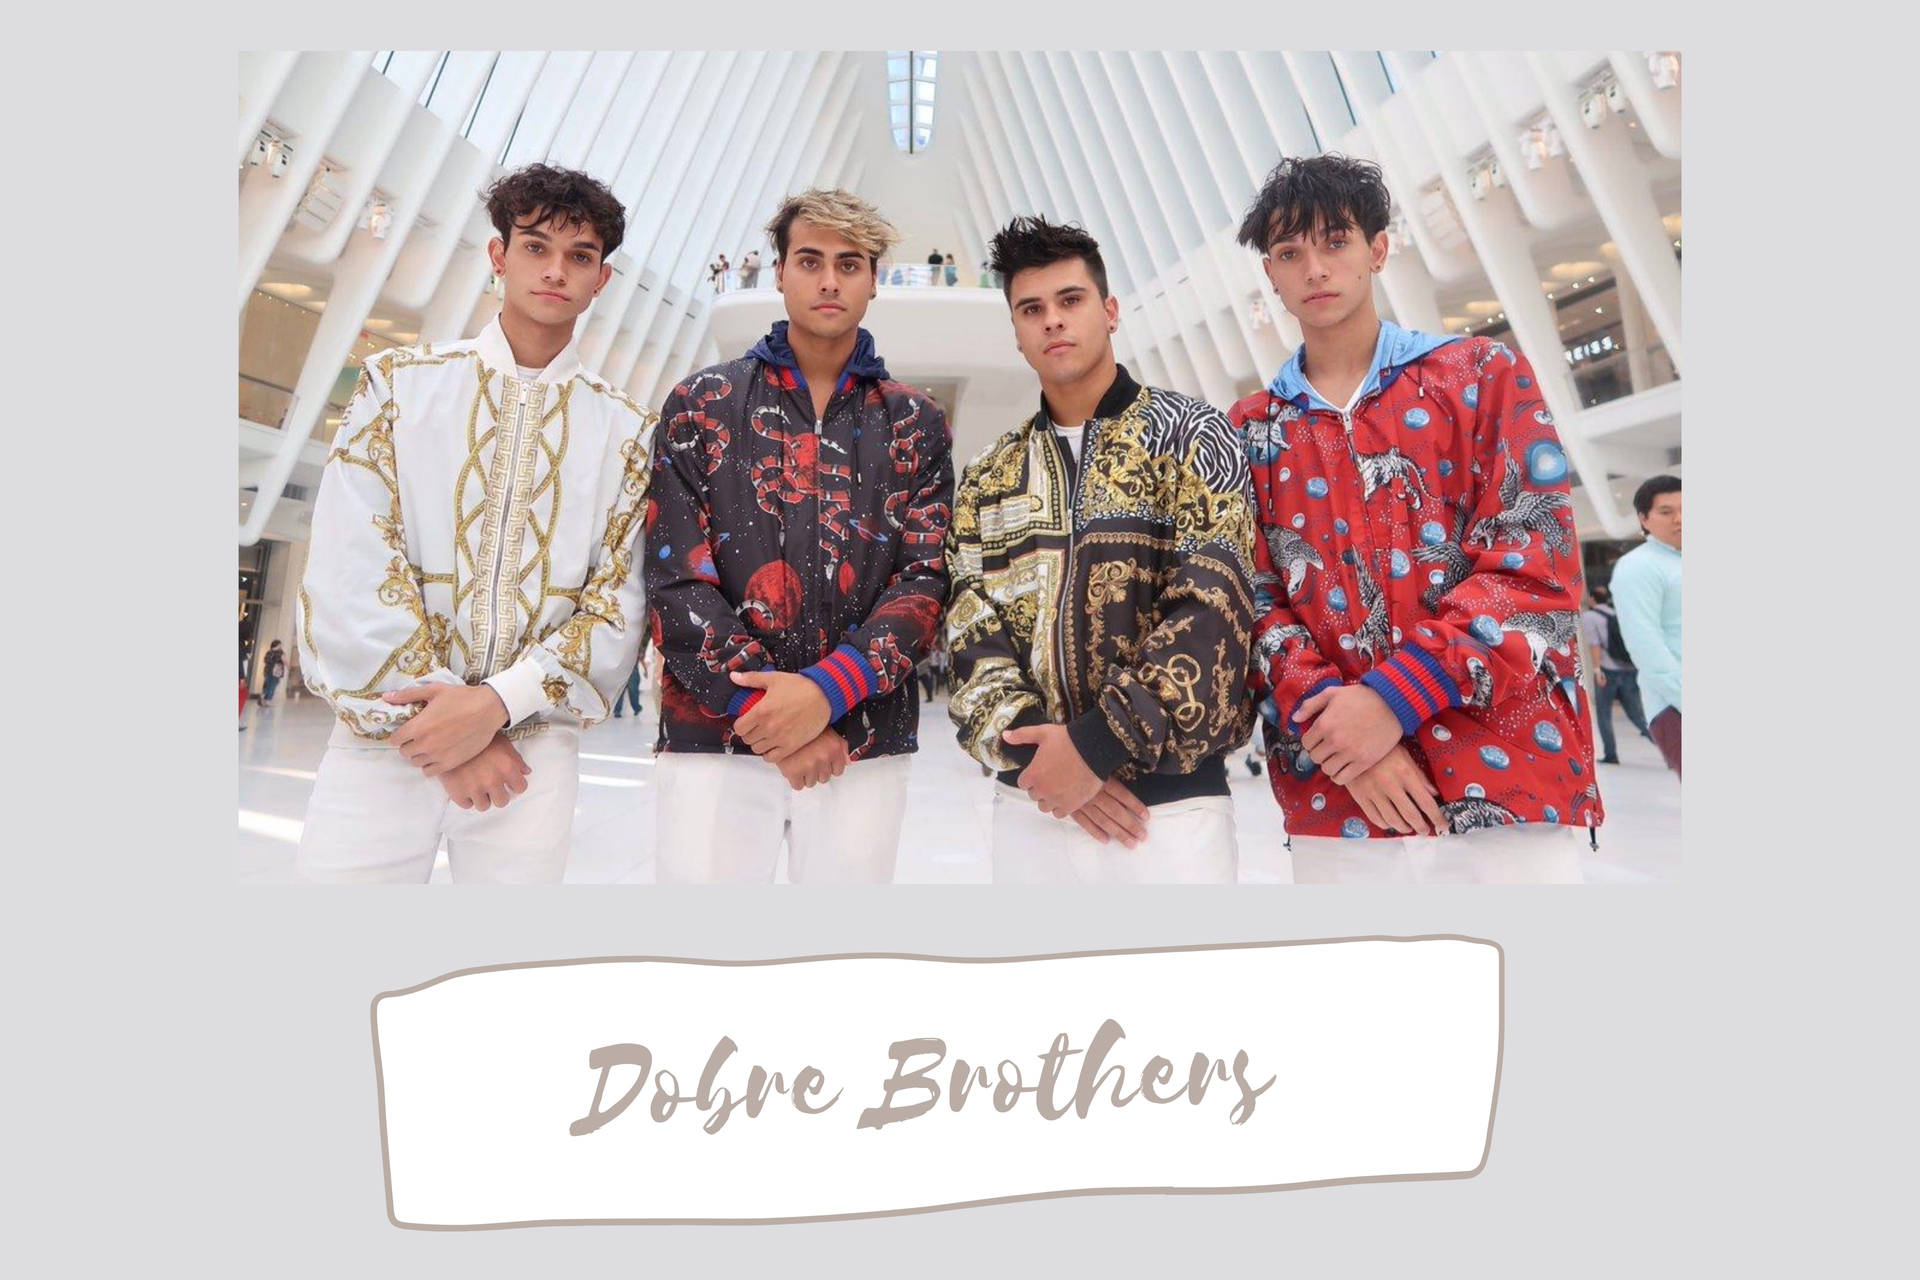 Dobre Brothers Pictures